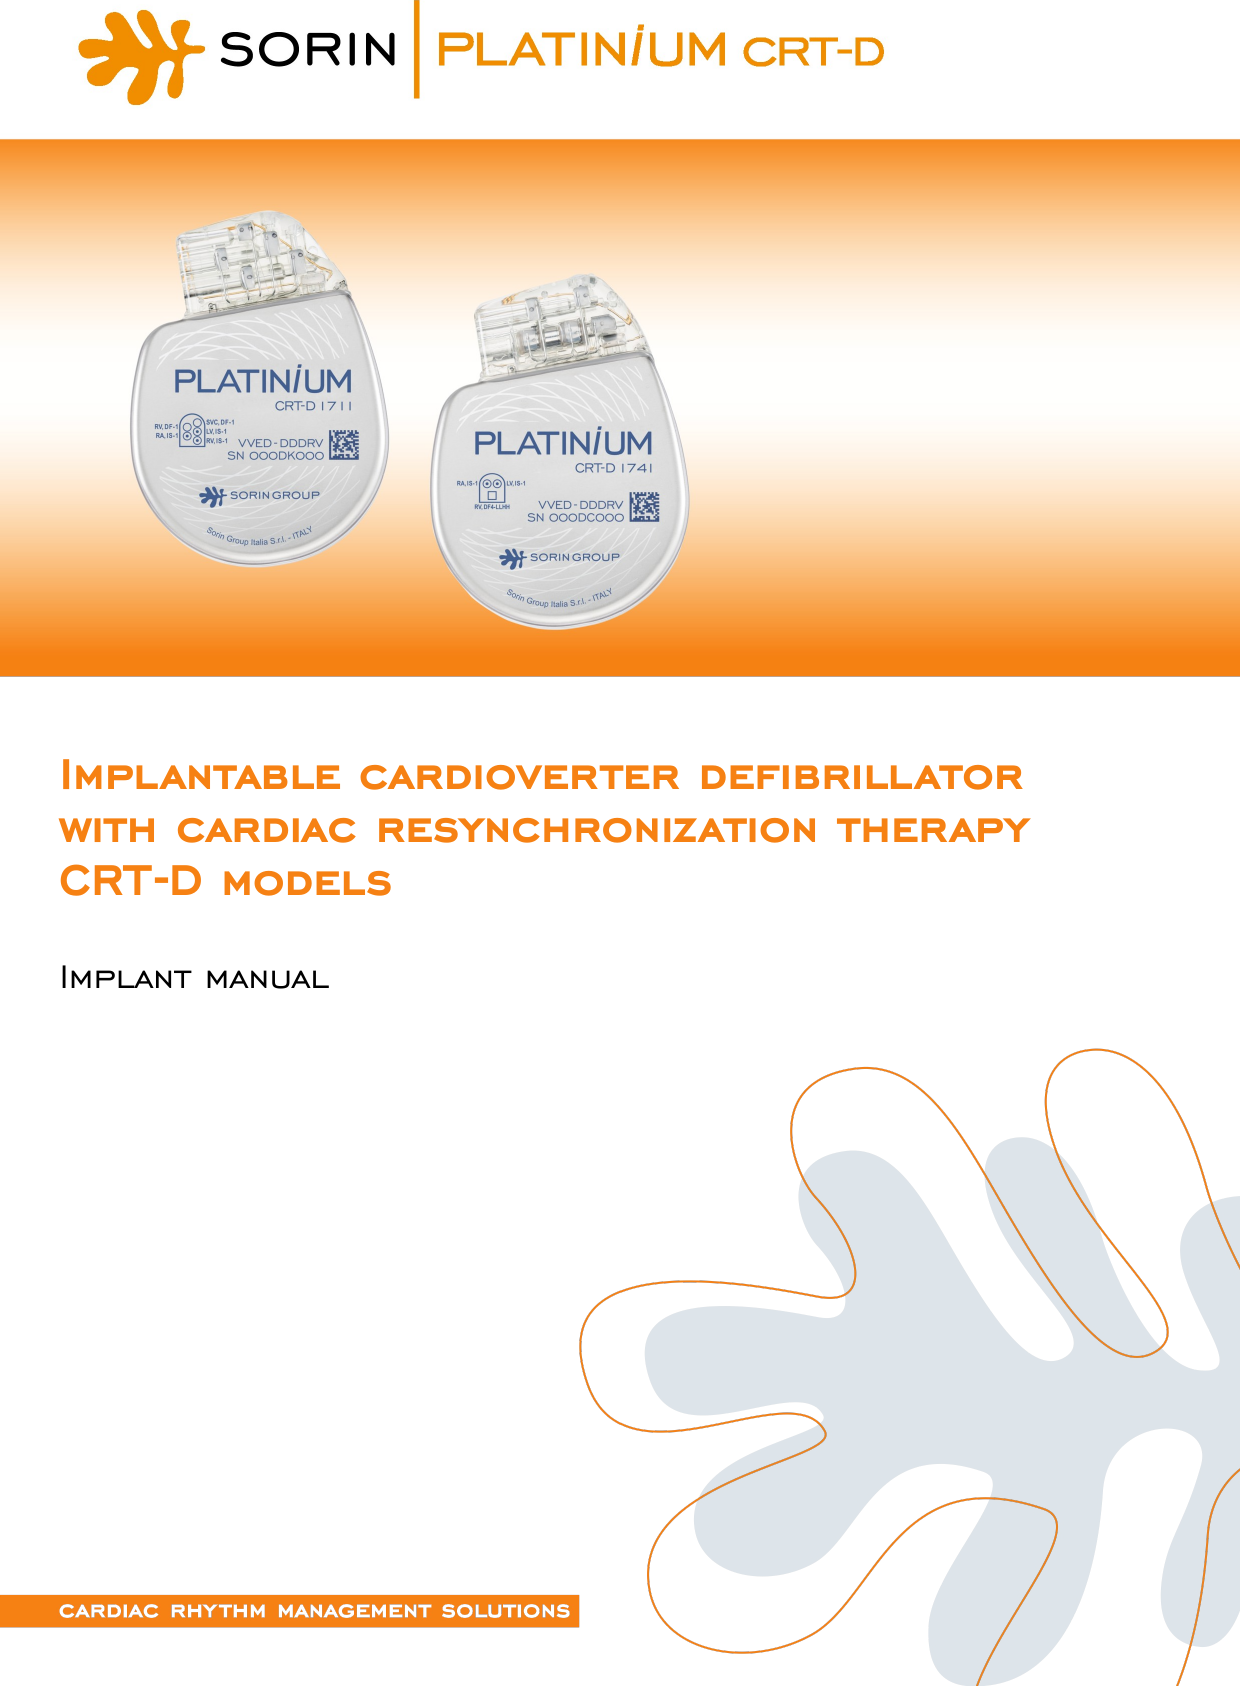 Implantable cardioverter defibrillator with cardiac resynchronization therapyCRT -D modelsImplant manual